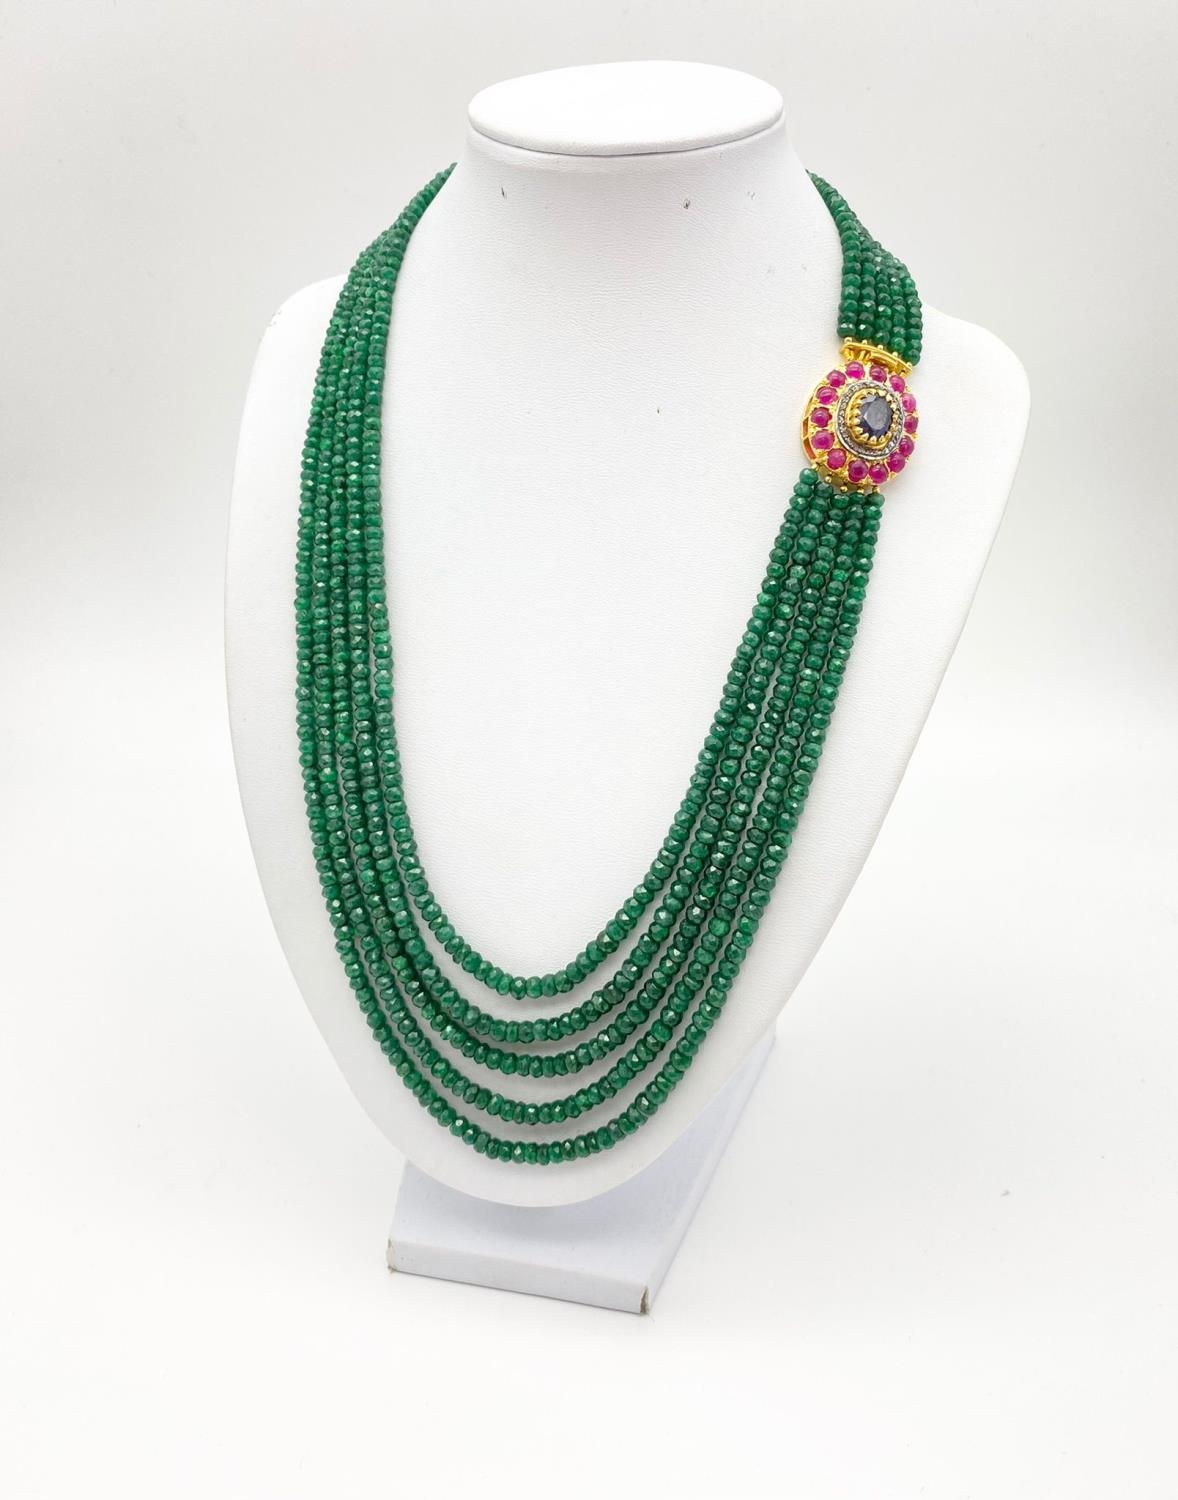 395cts Five-Row Emerald Necklace with Ruby and Sapphire Clasp. With a halo of Rose Cut Diamonds.